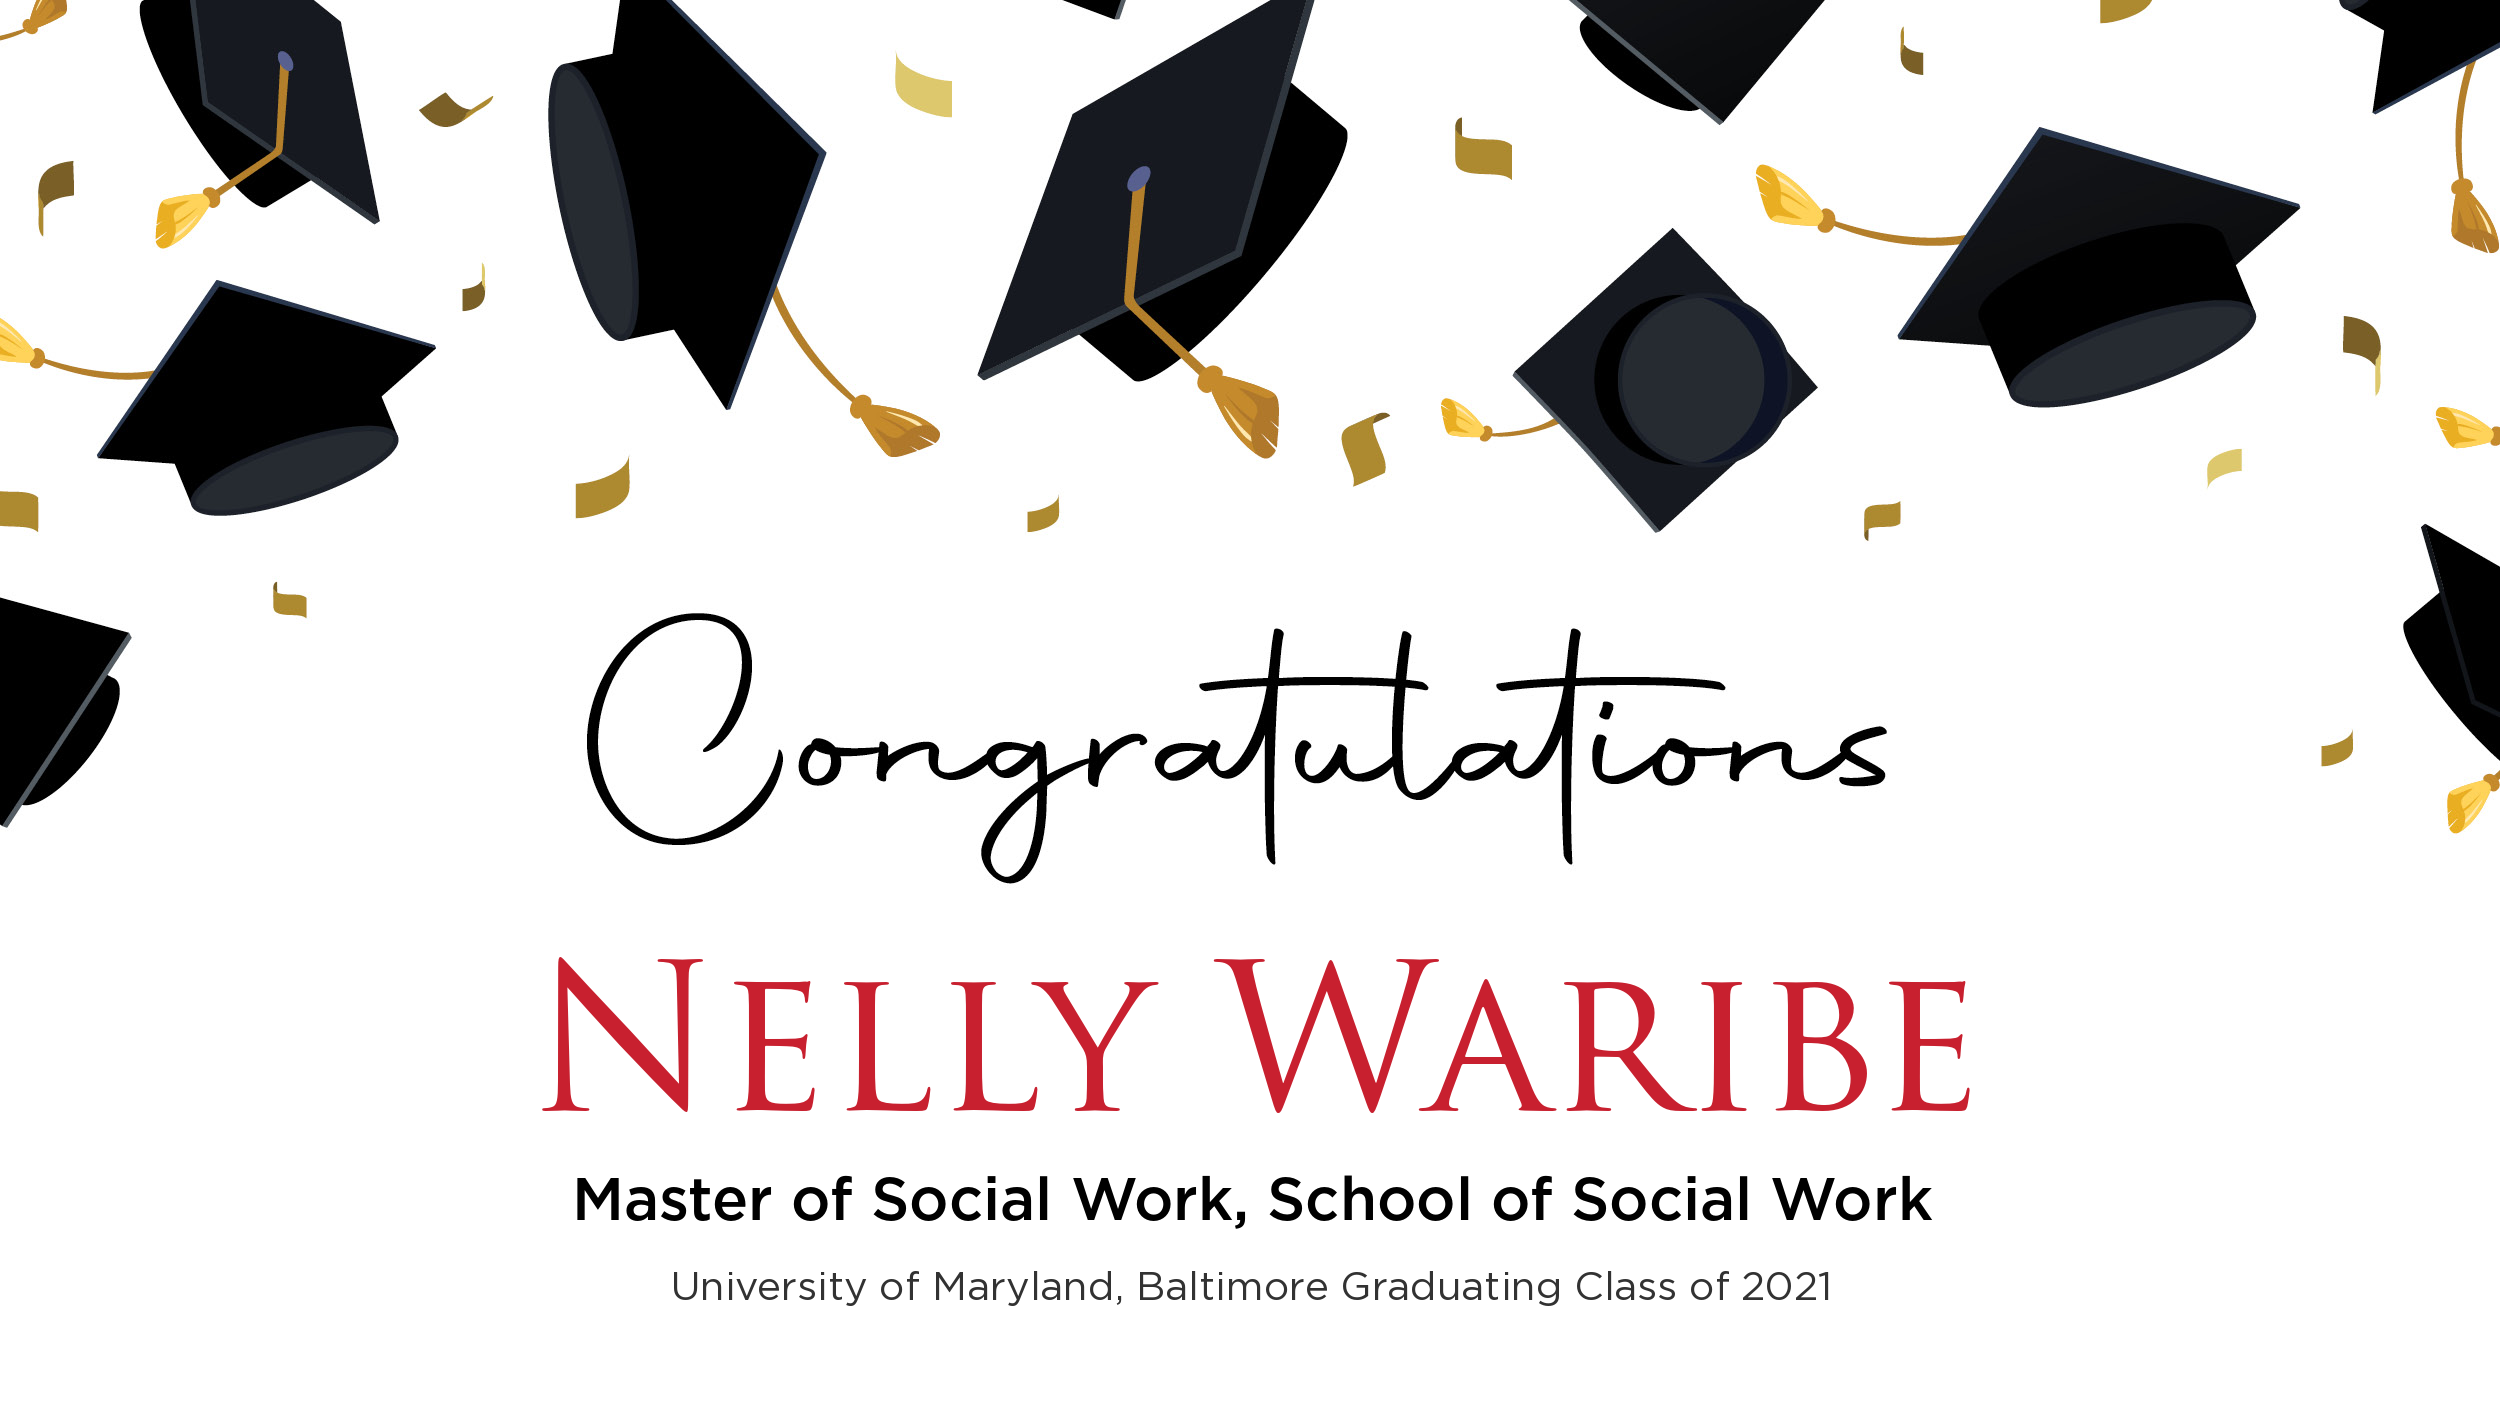 Congratulations Nelly Waribe, Master of Social Work